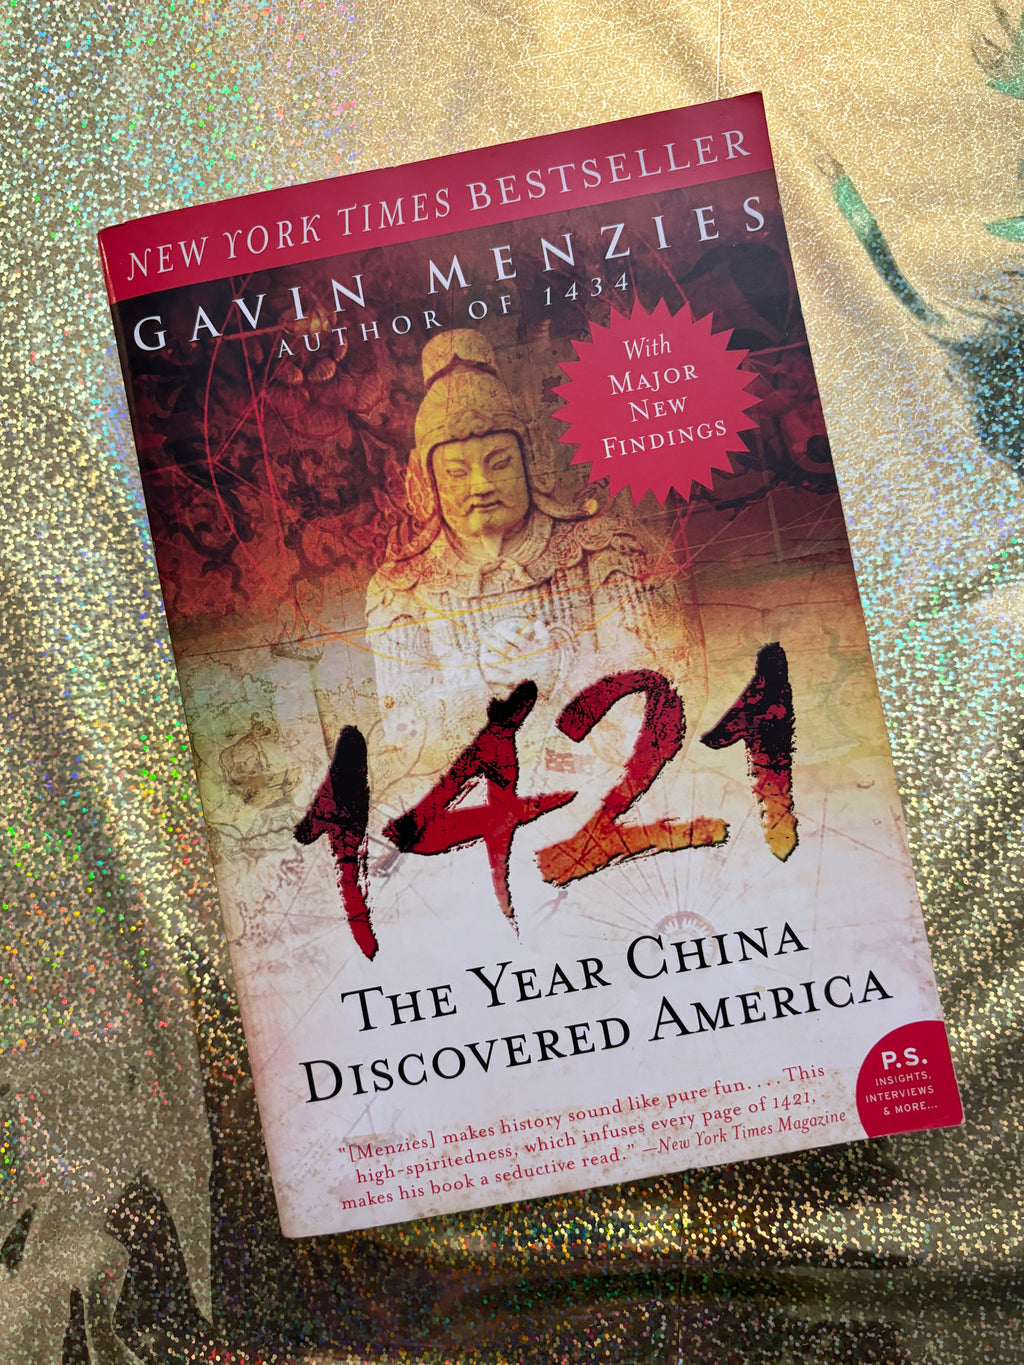 1421: The Year China Discovered America- By Gavin Menzies